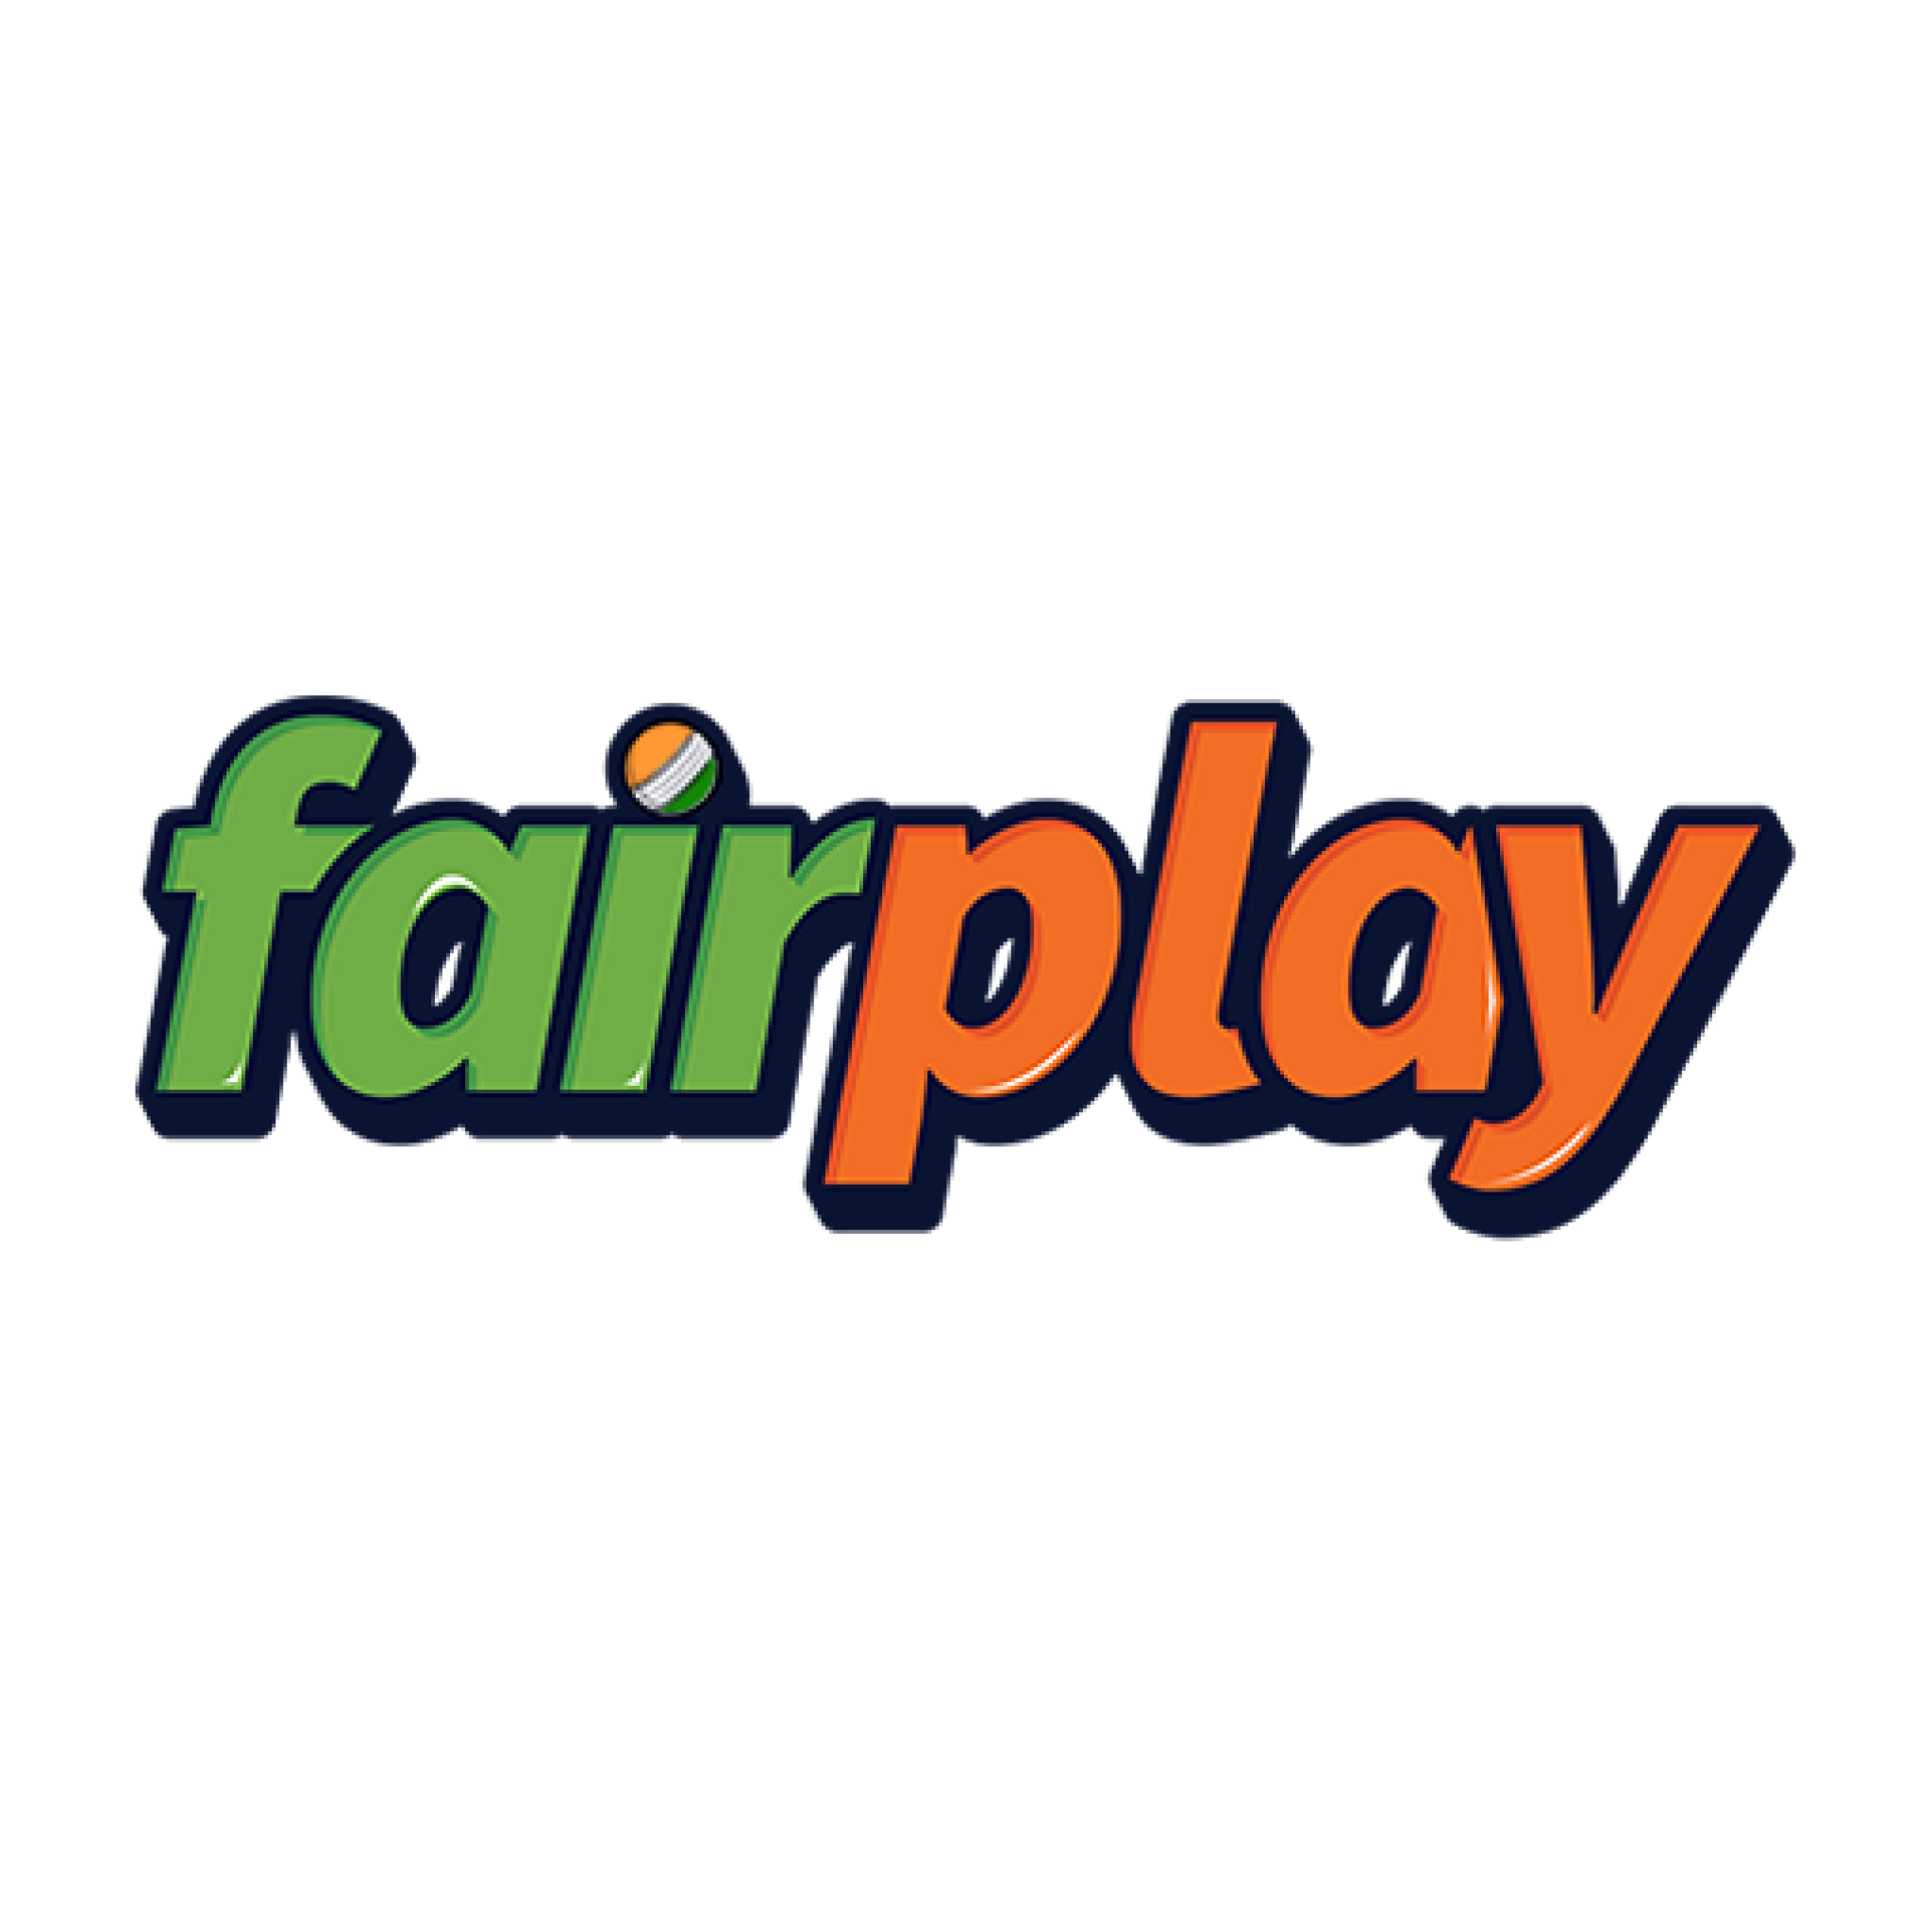 Start betting on cricket online with Fairplay!